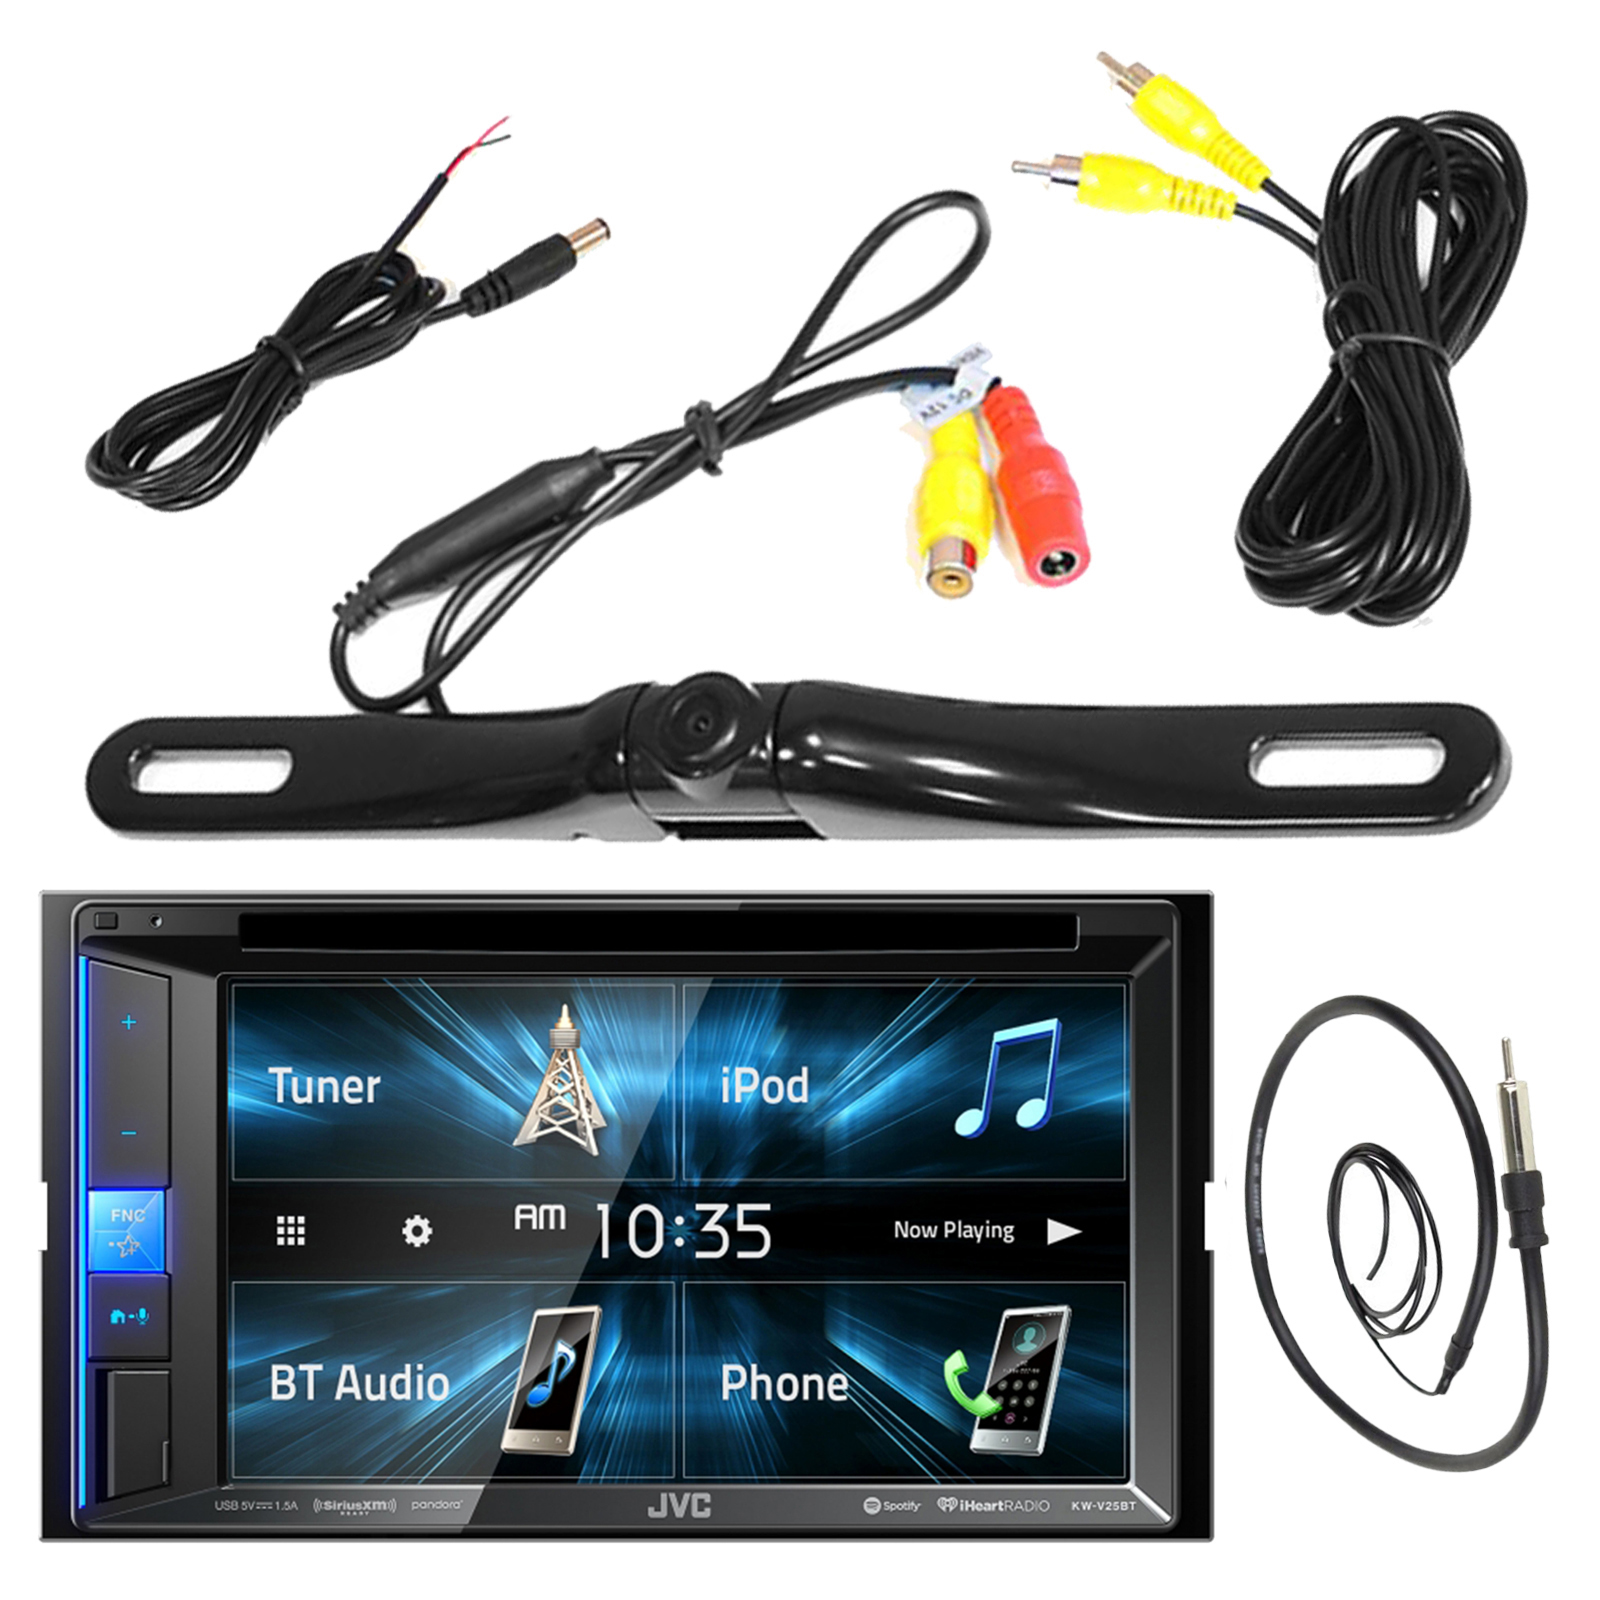 JVC KWV140BT 6.2" Inch Touch Screen Car CD DVD USB Bluetooth Stereo Receiver Bundle Combo With License Plate Mount Rear View Colored Backup Parking Camera, Enrock 22" AM/FM Radio Antenna - image 1 of 4